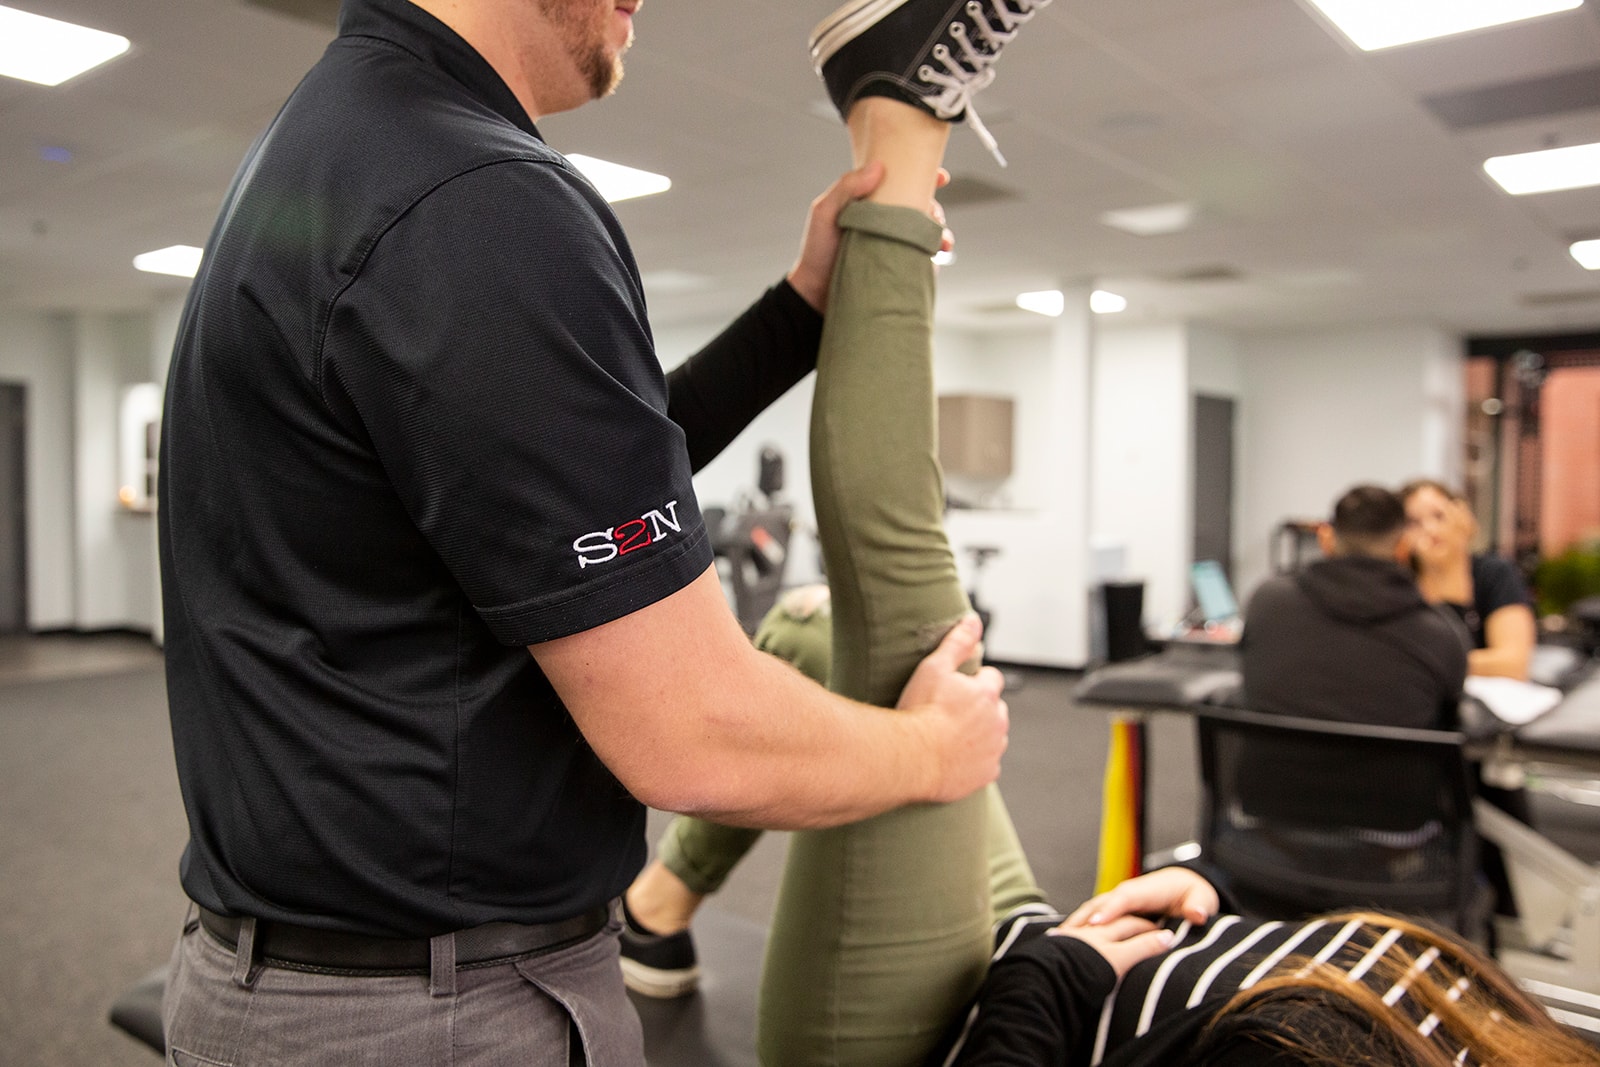 A physical therapist helps alleviate leg pain.